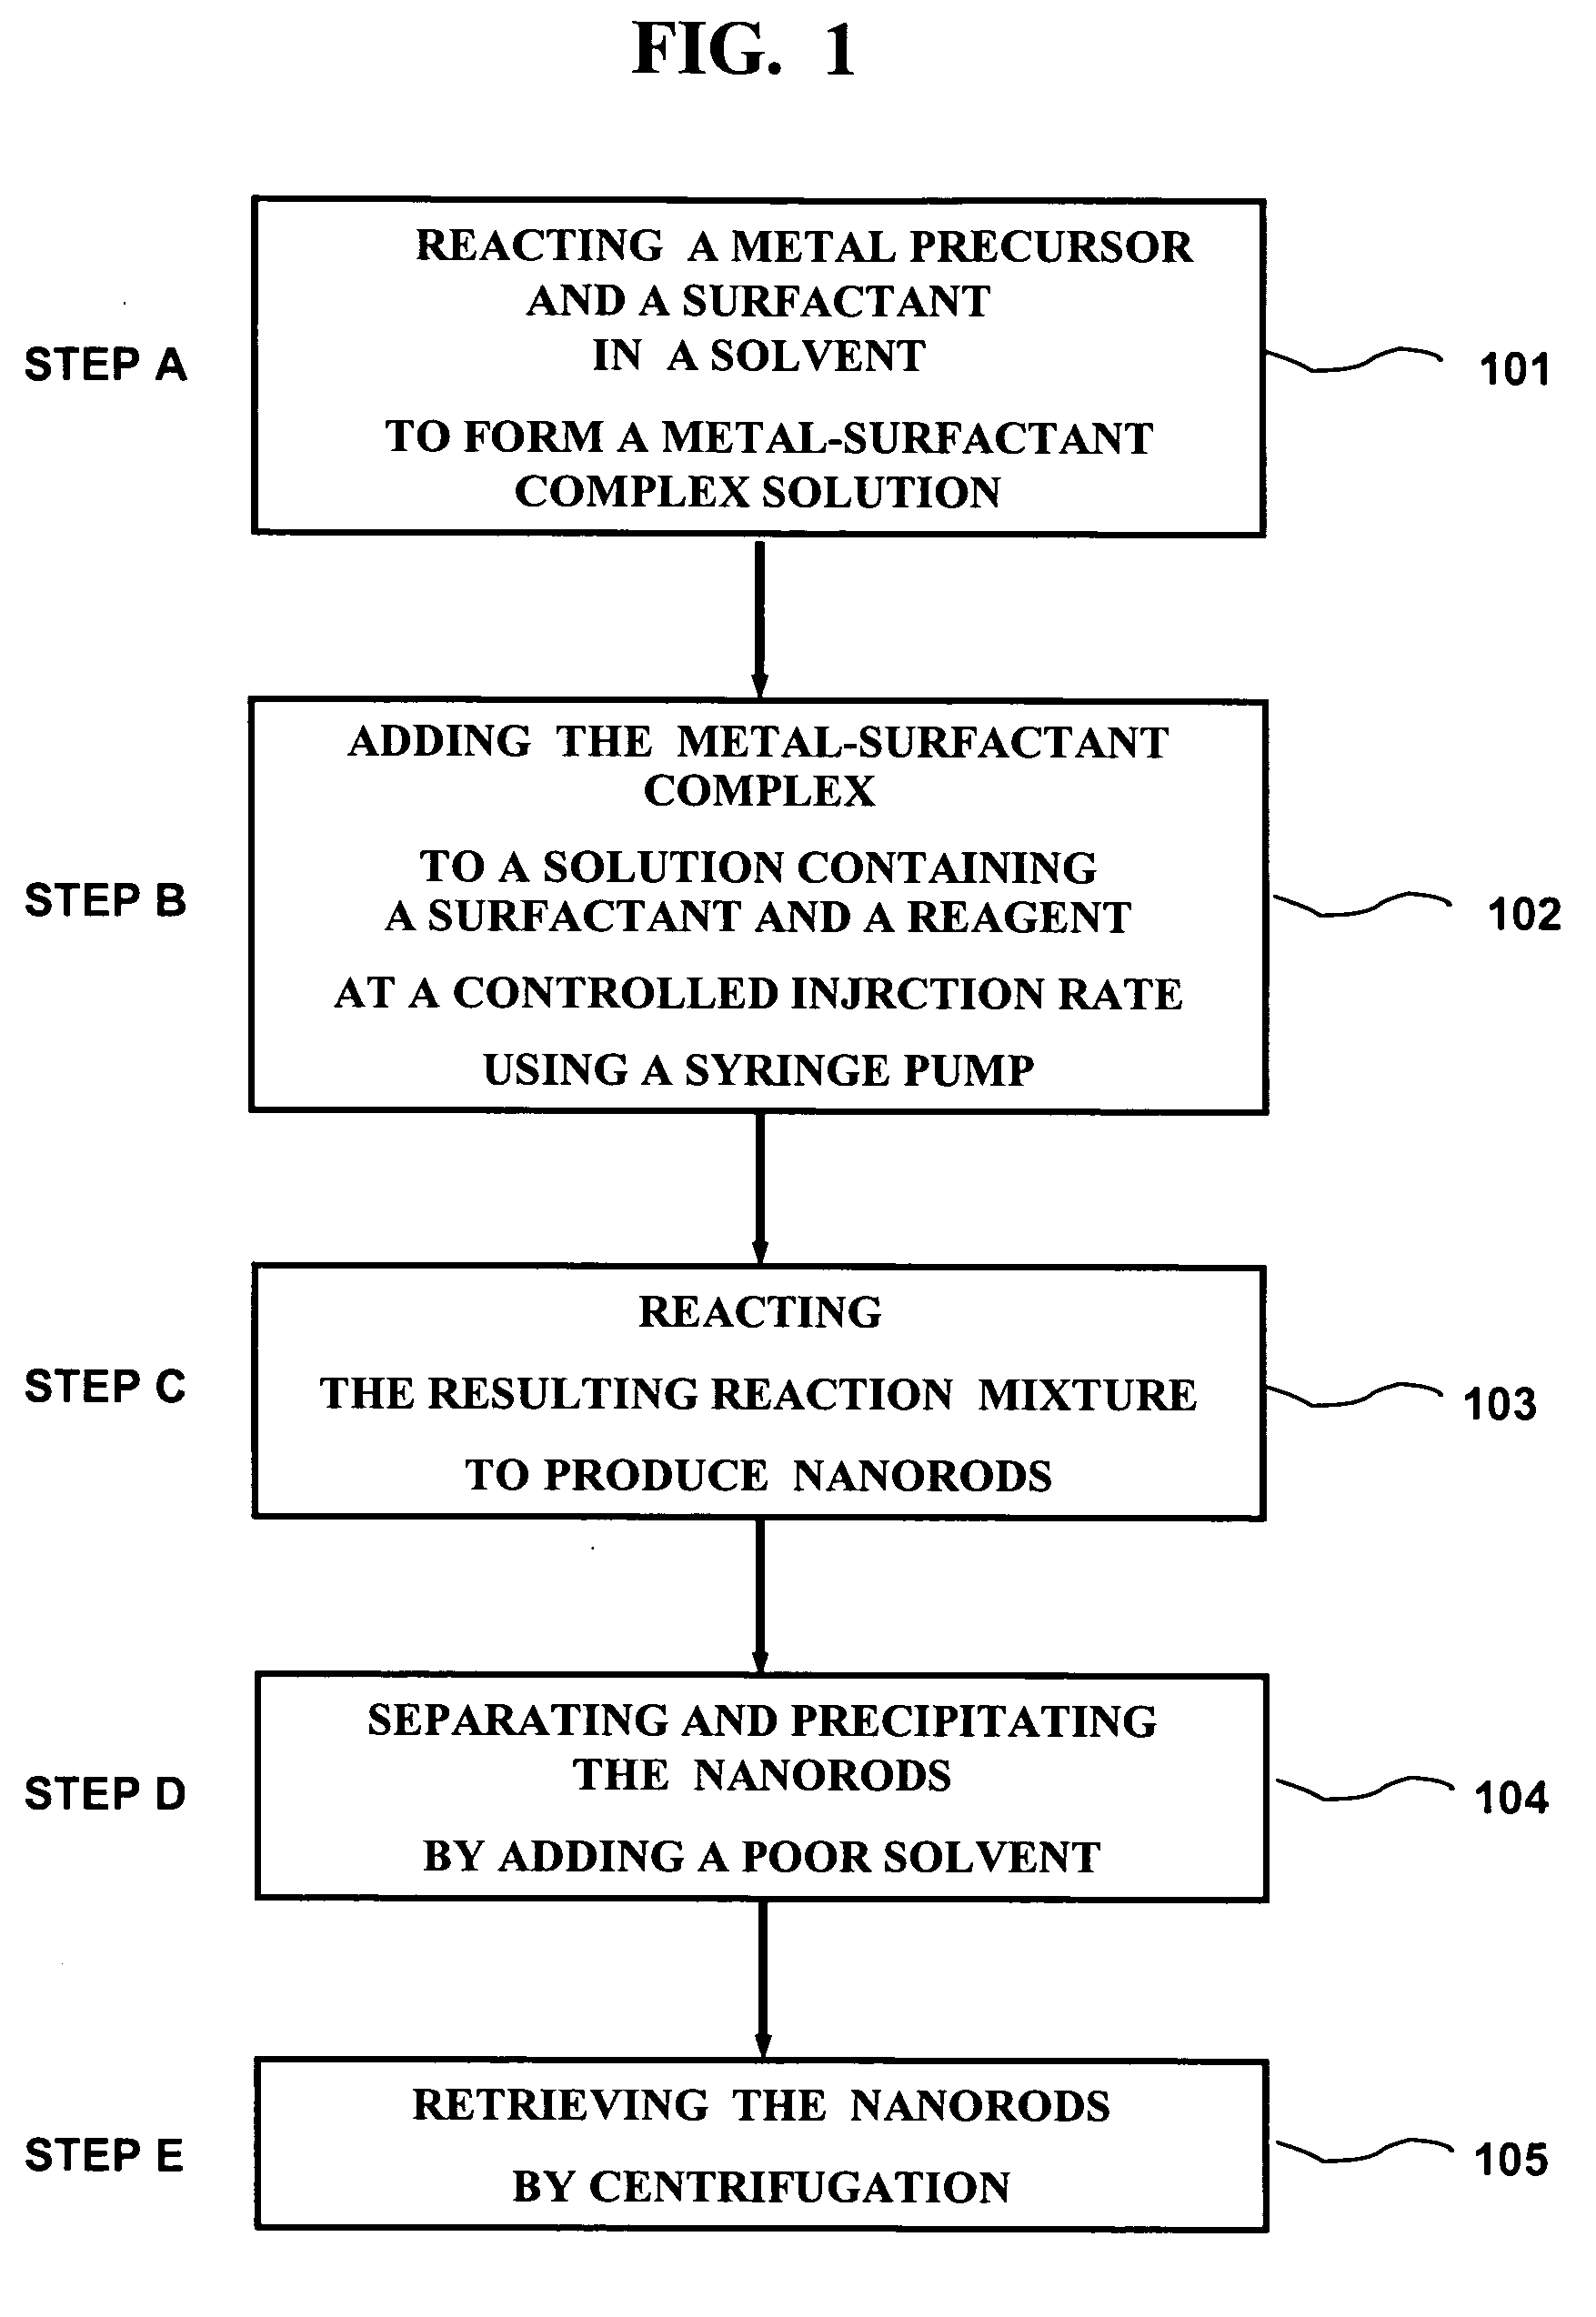 Method of synthesizing nanorods by reaction of metal-surfactant complexes injected using a syringe pump